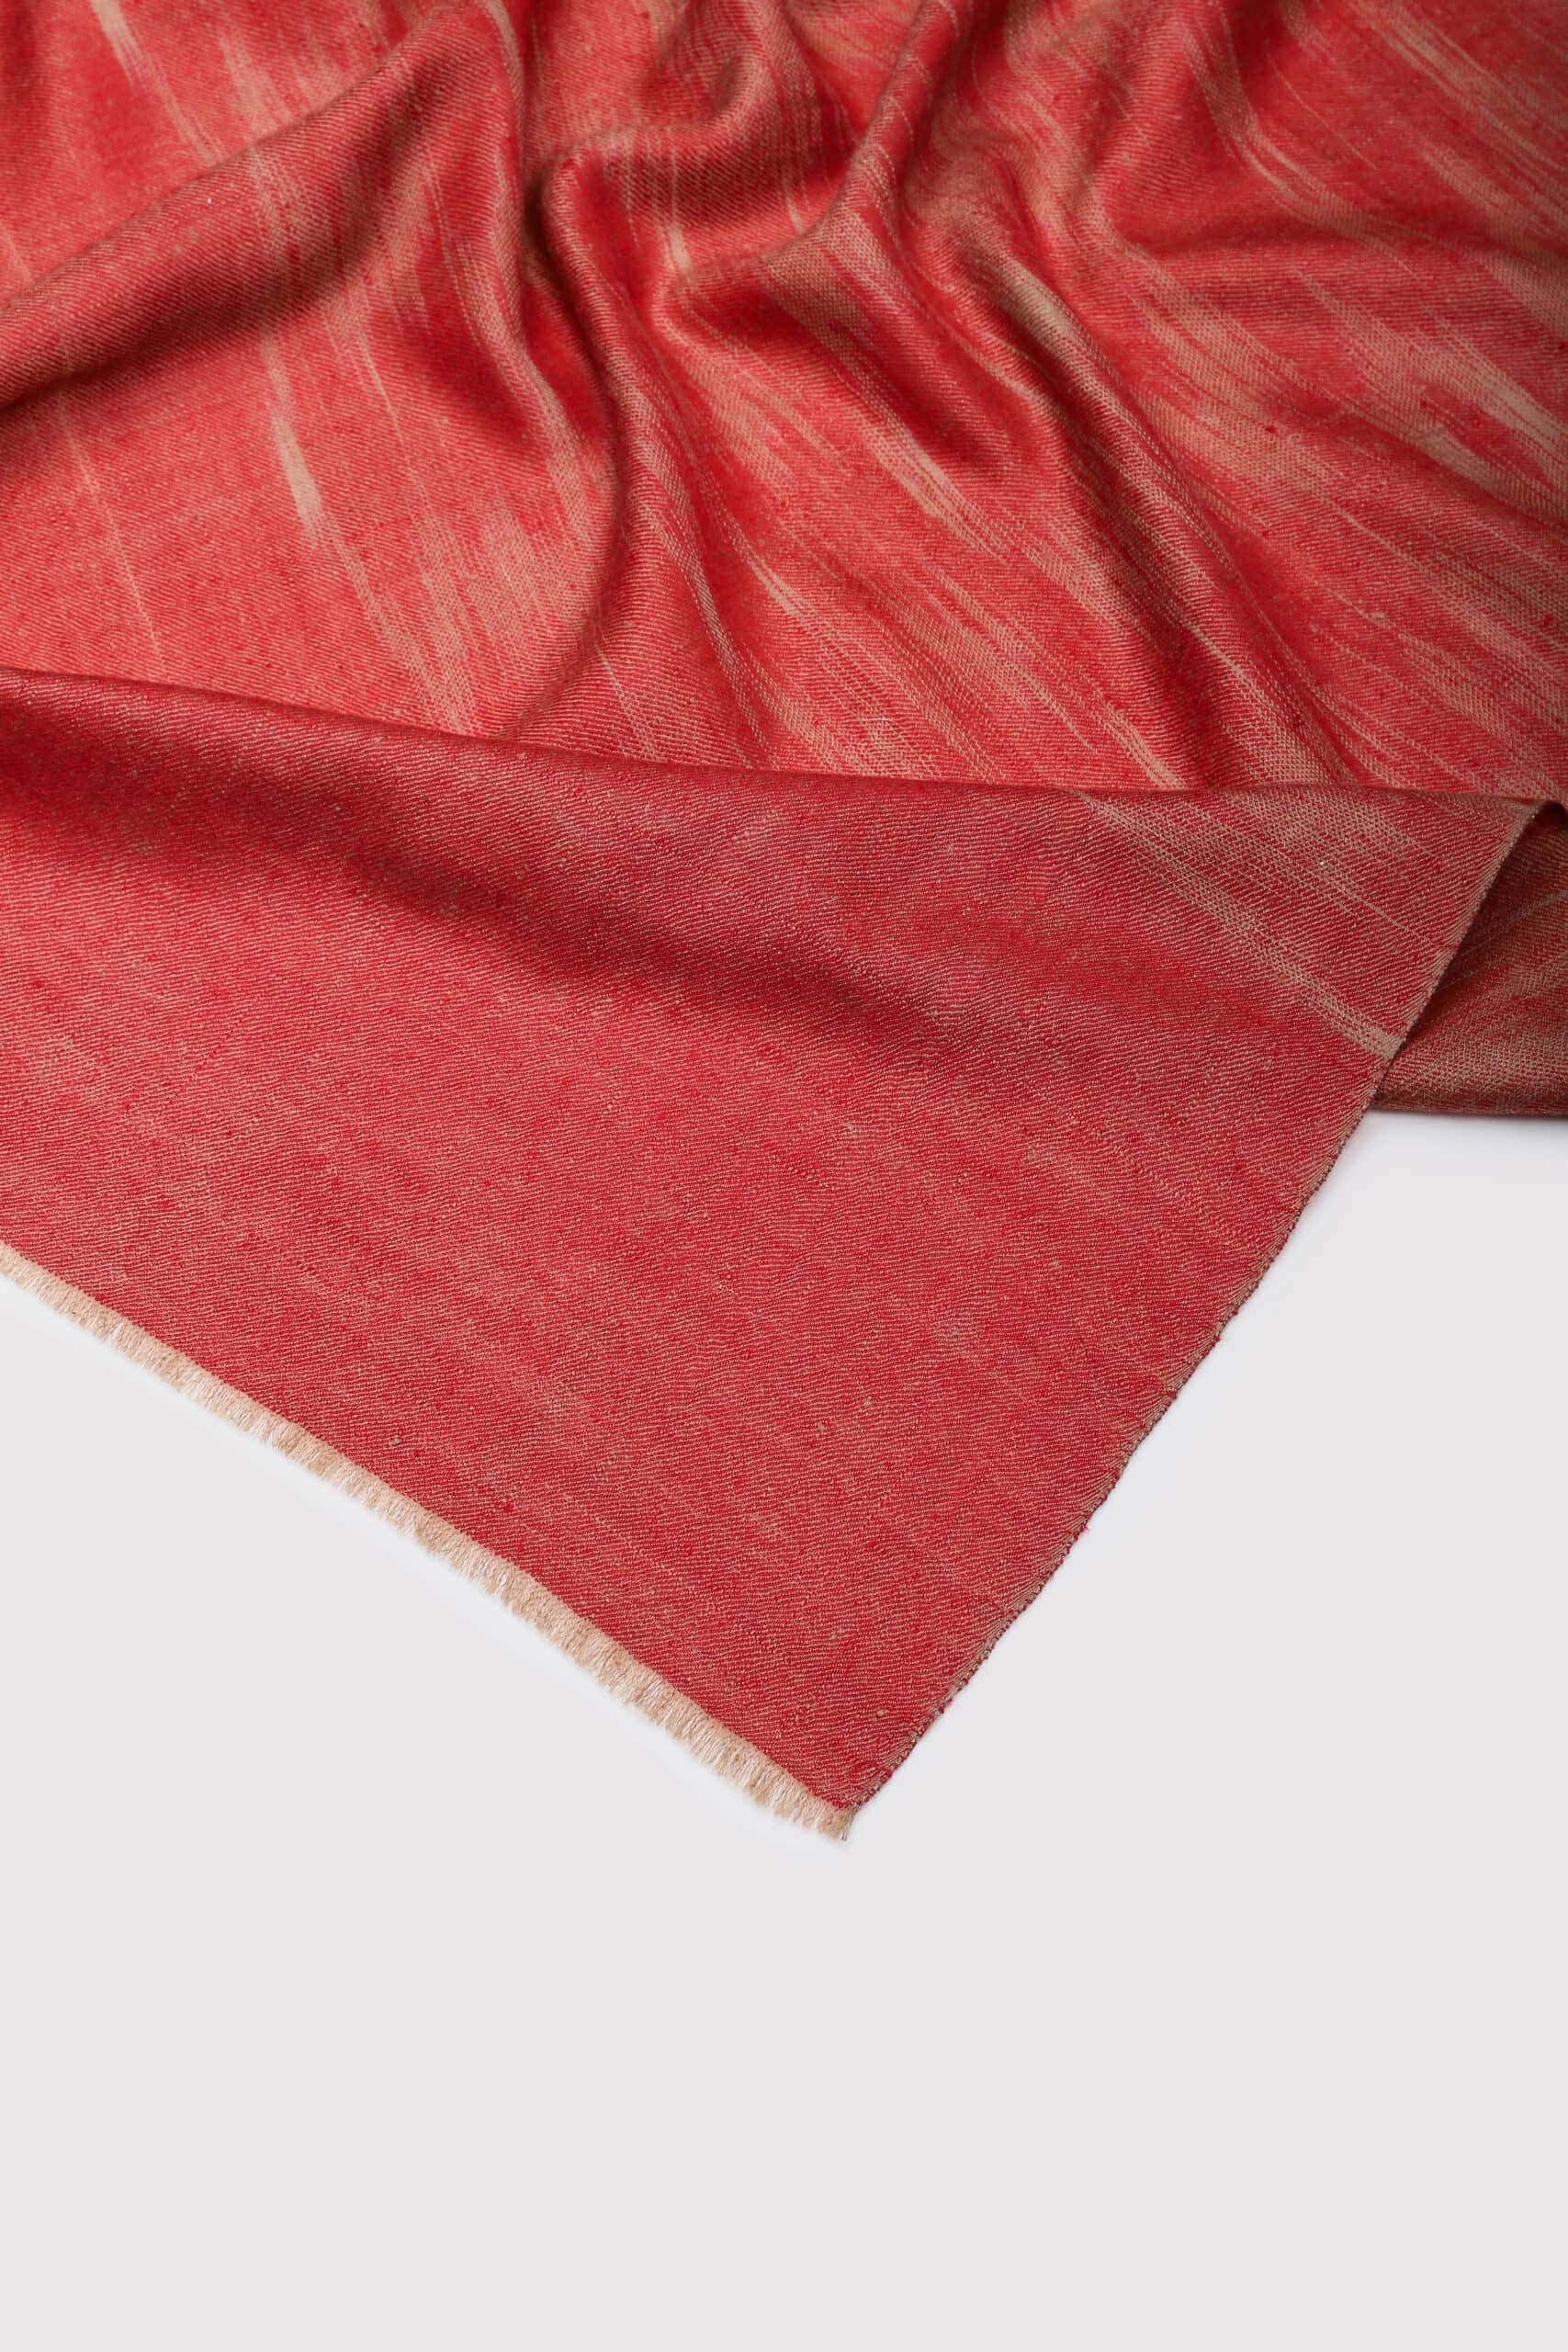 Red & beige shaded Ikat shawl on a white background- Me & K